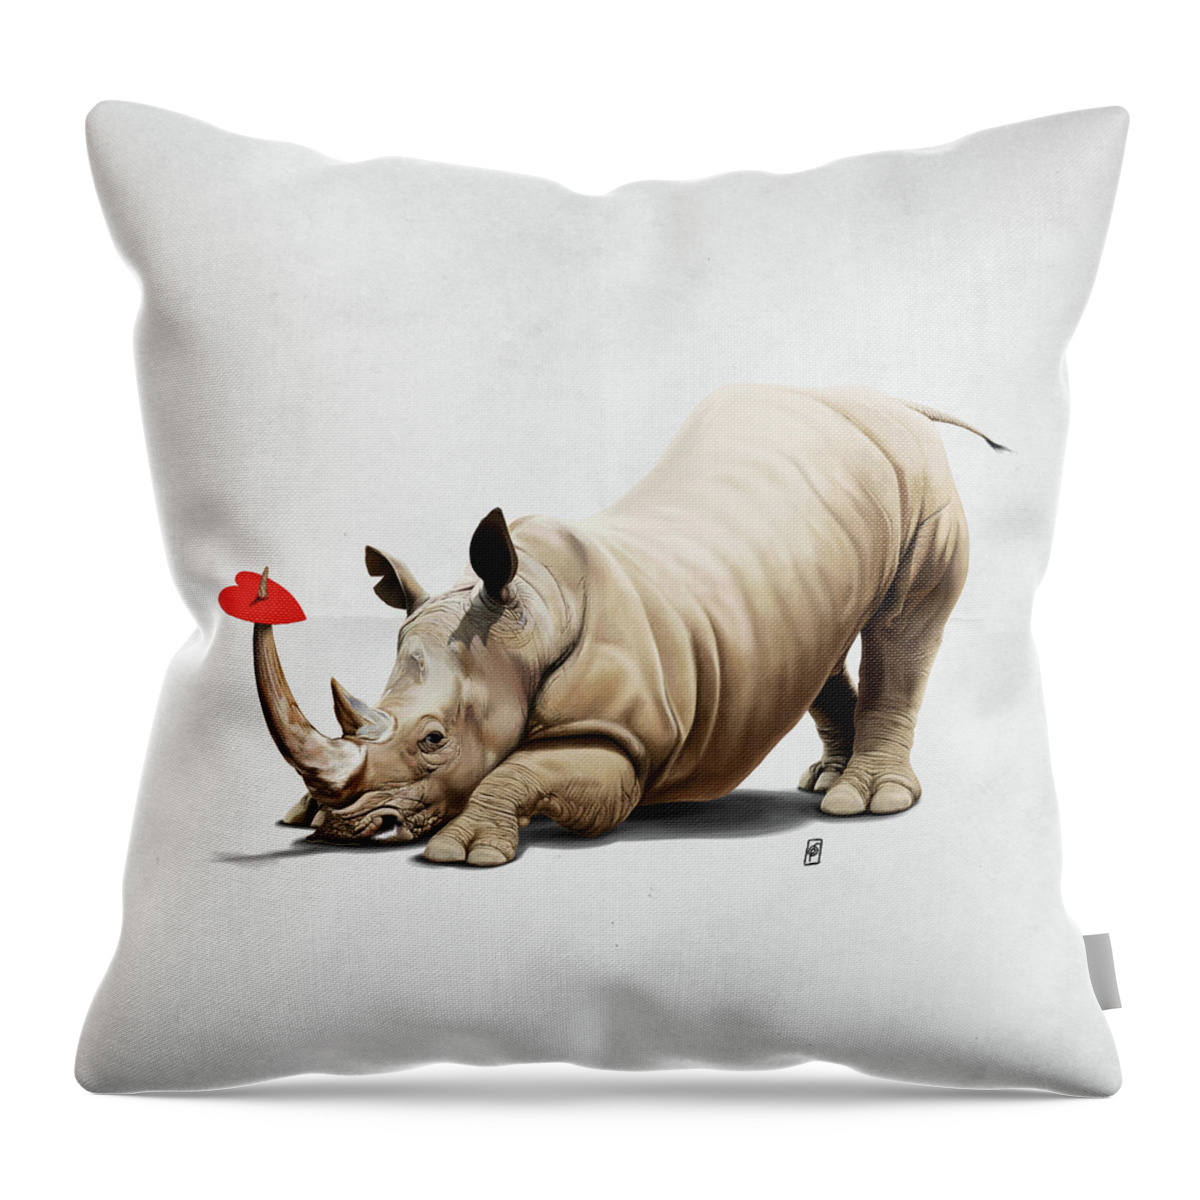 Illustration Throw Pillow featuring the digital art Horny Wordless by Rob Snow